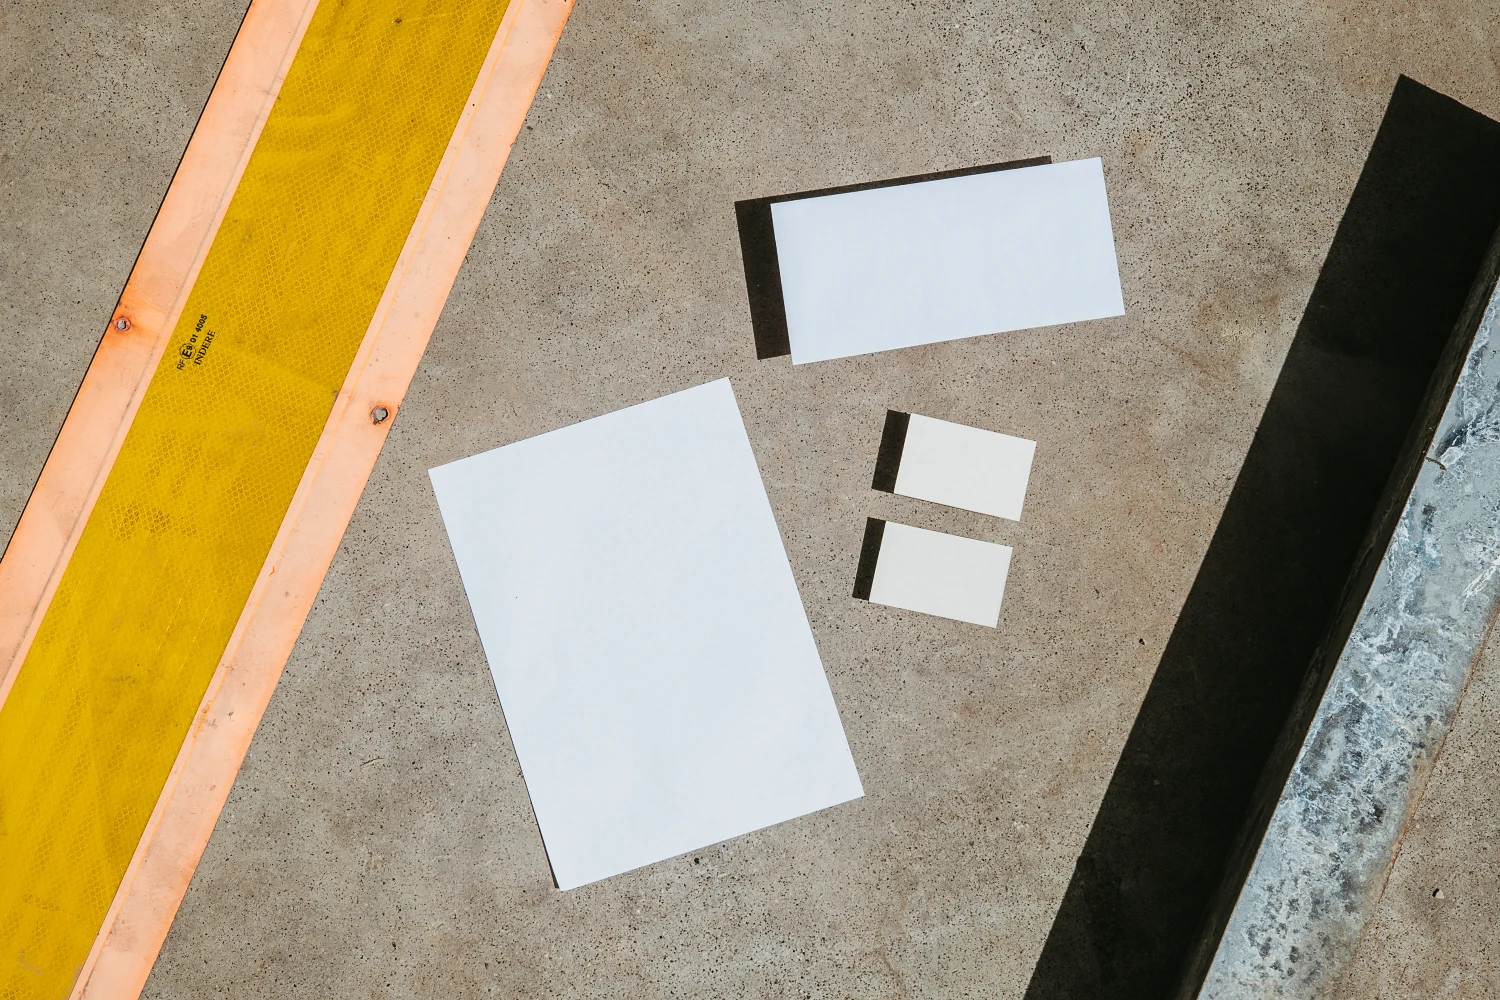 Urban stationery mockups placed in the floor and surrounded by industrial elements.